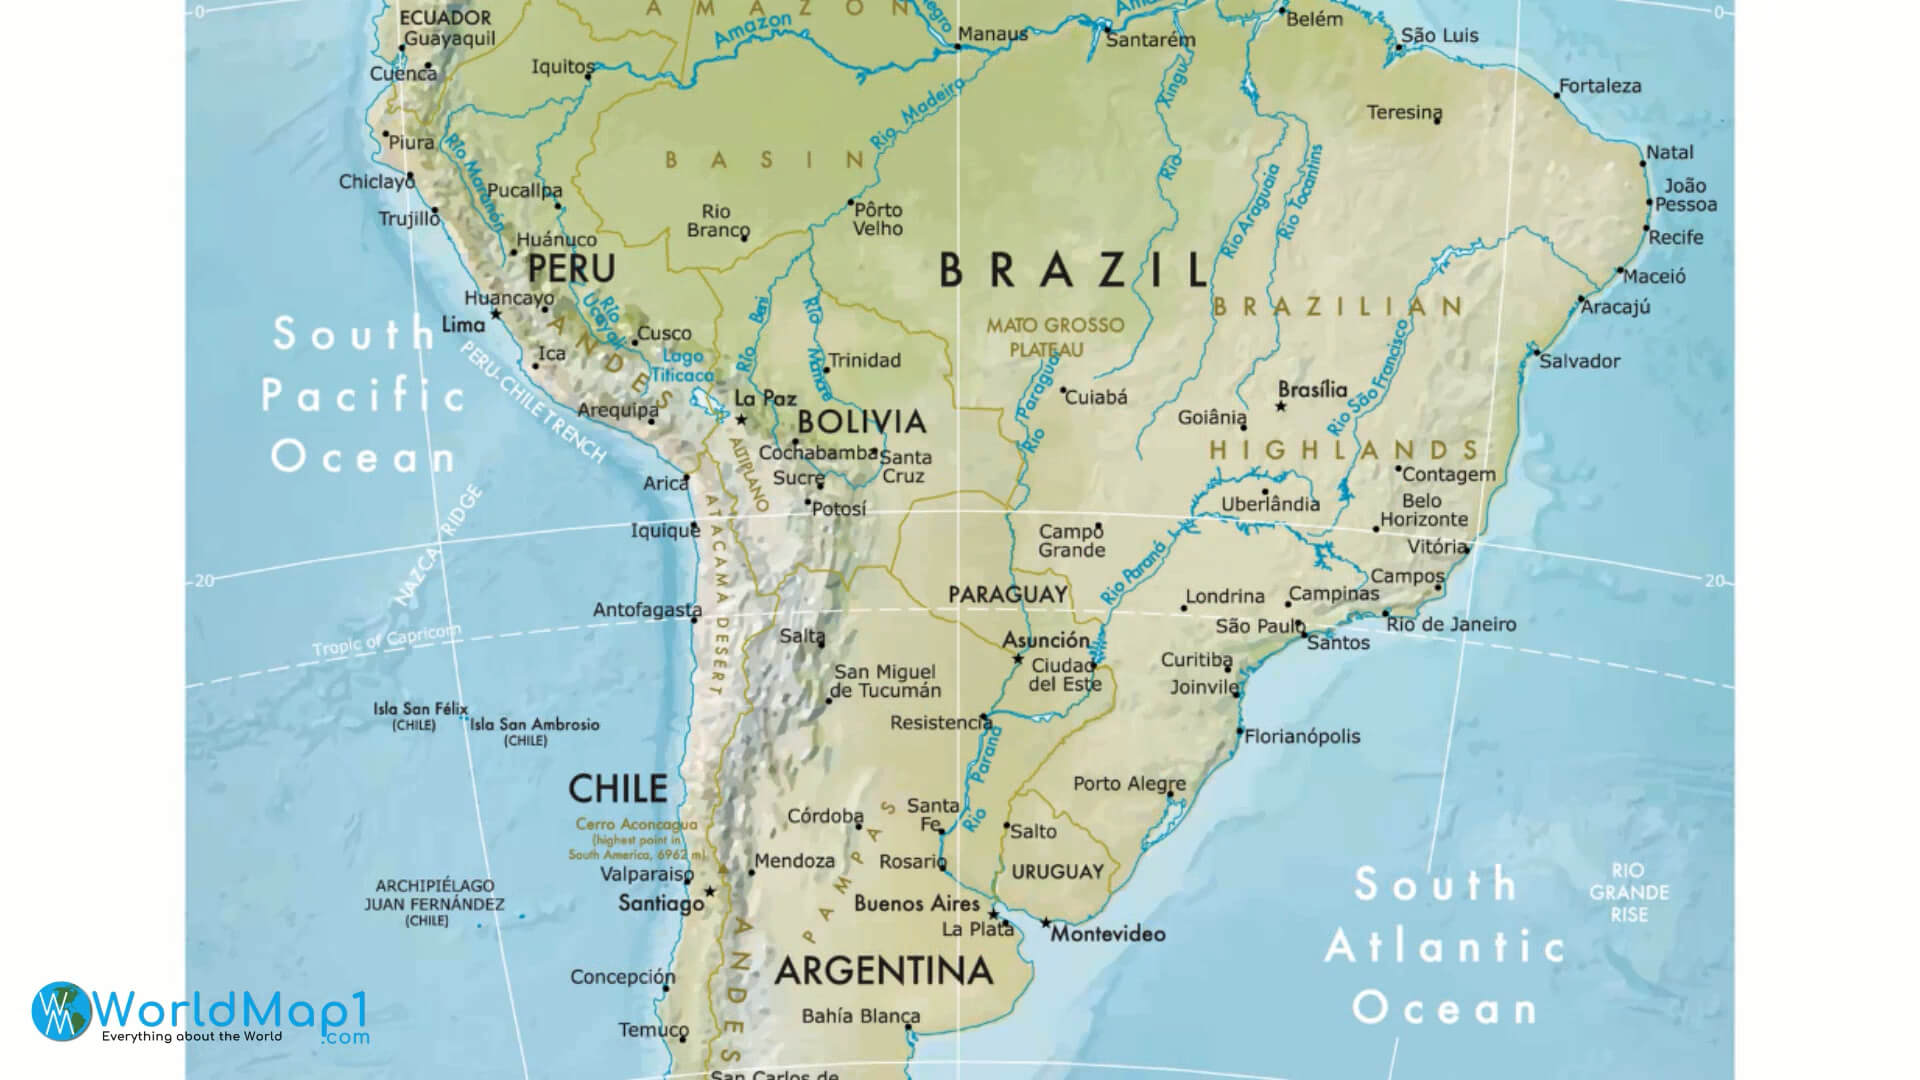 Rivers Map of South America